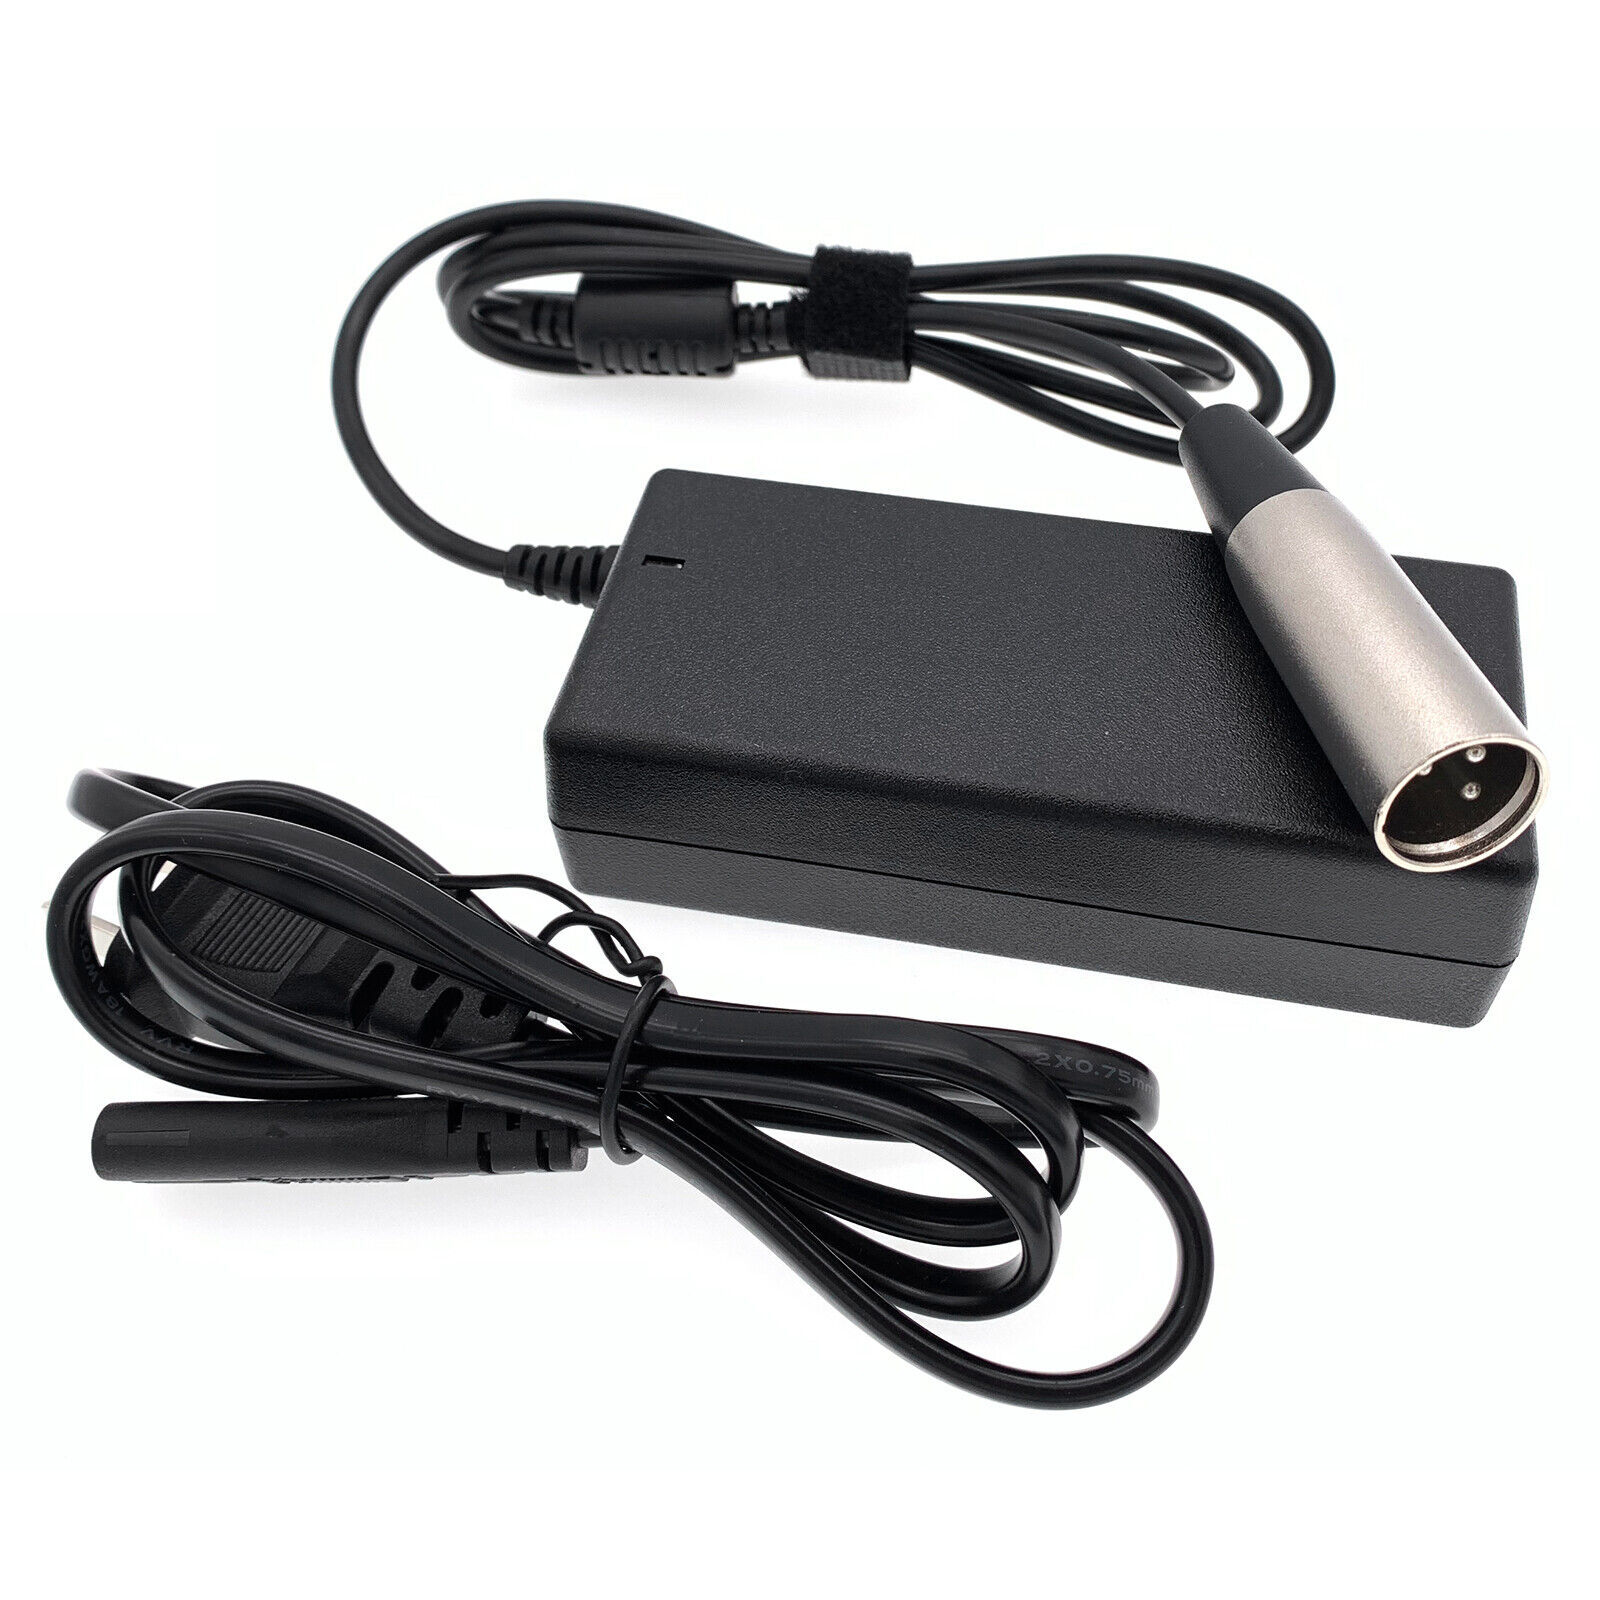 Primary image for 24V New Electric Scooter Battery Charger for Go-Go Elite Traveller Plus HD US